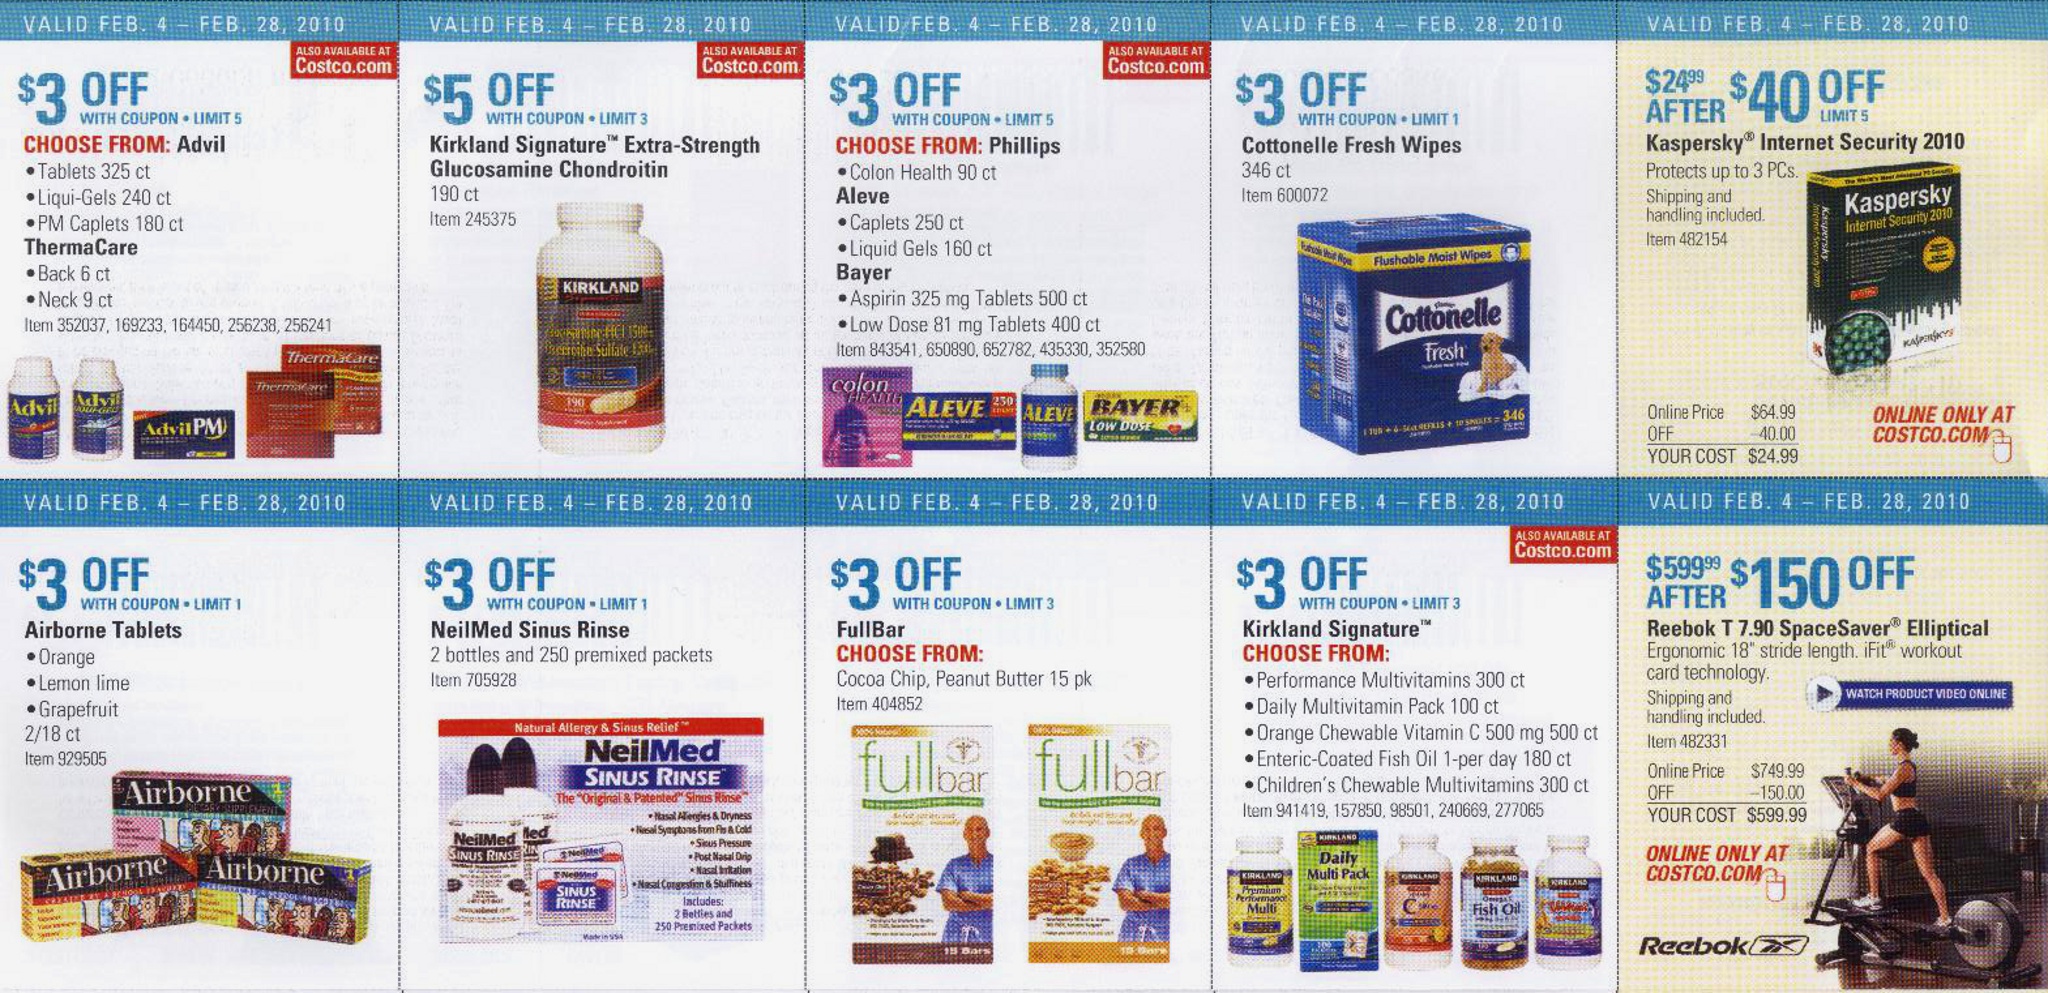 Coupon book full size page ->9<-